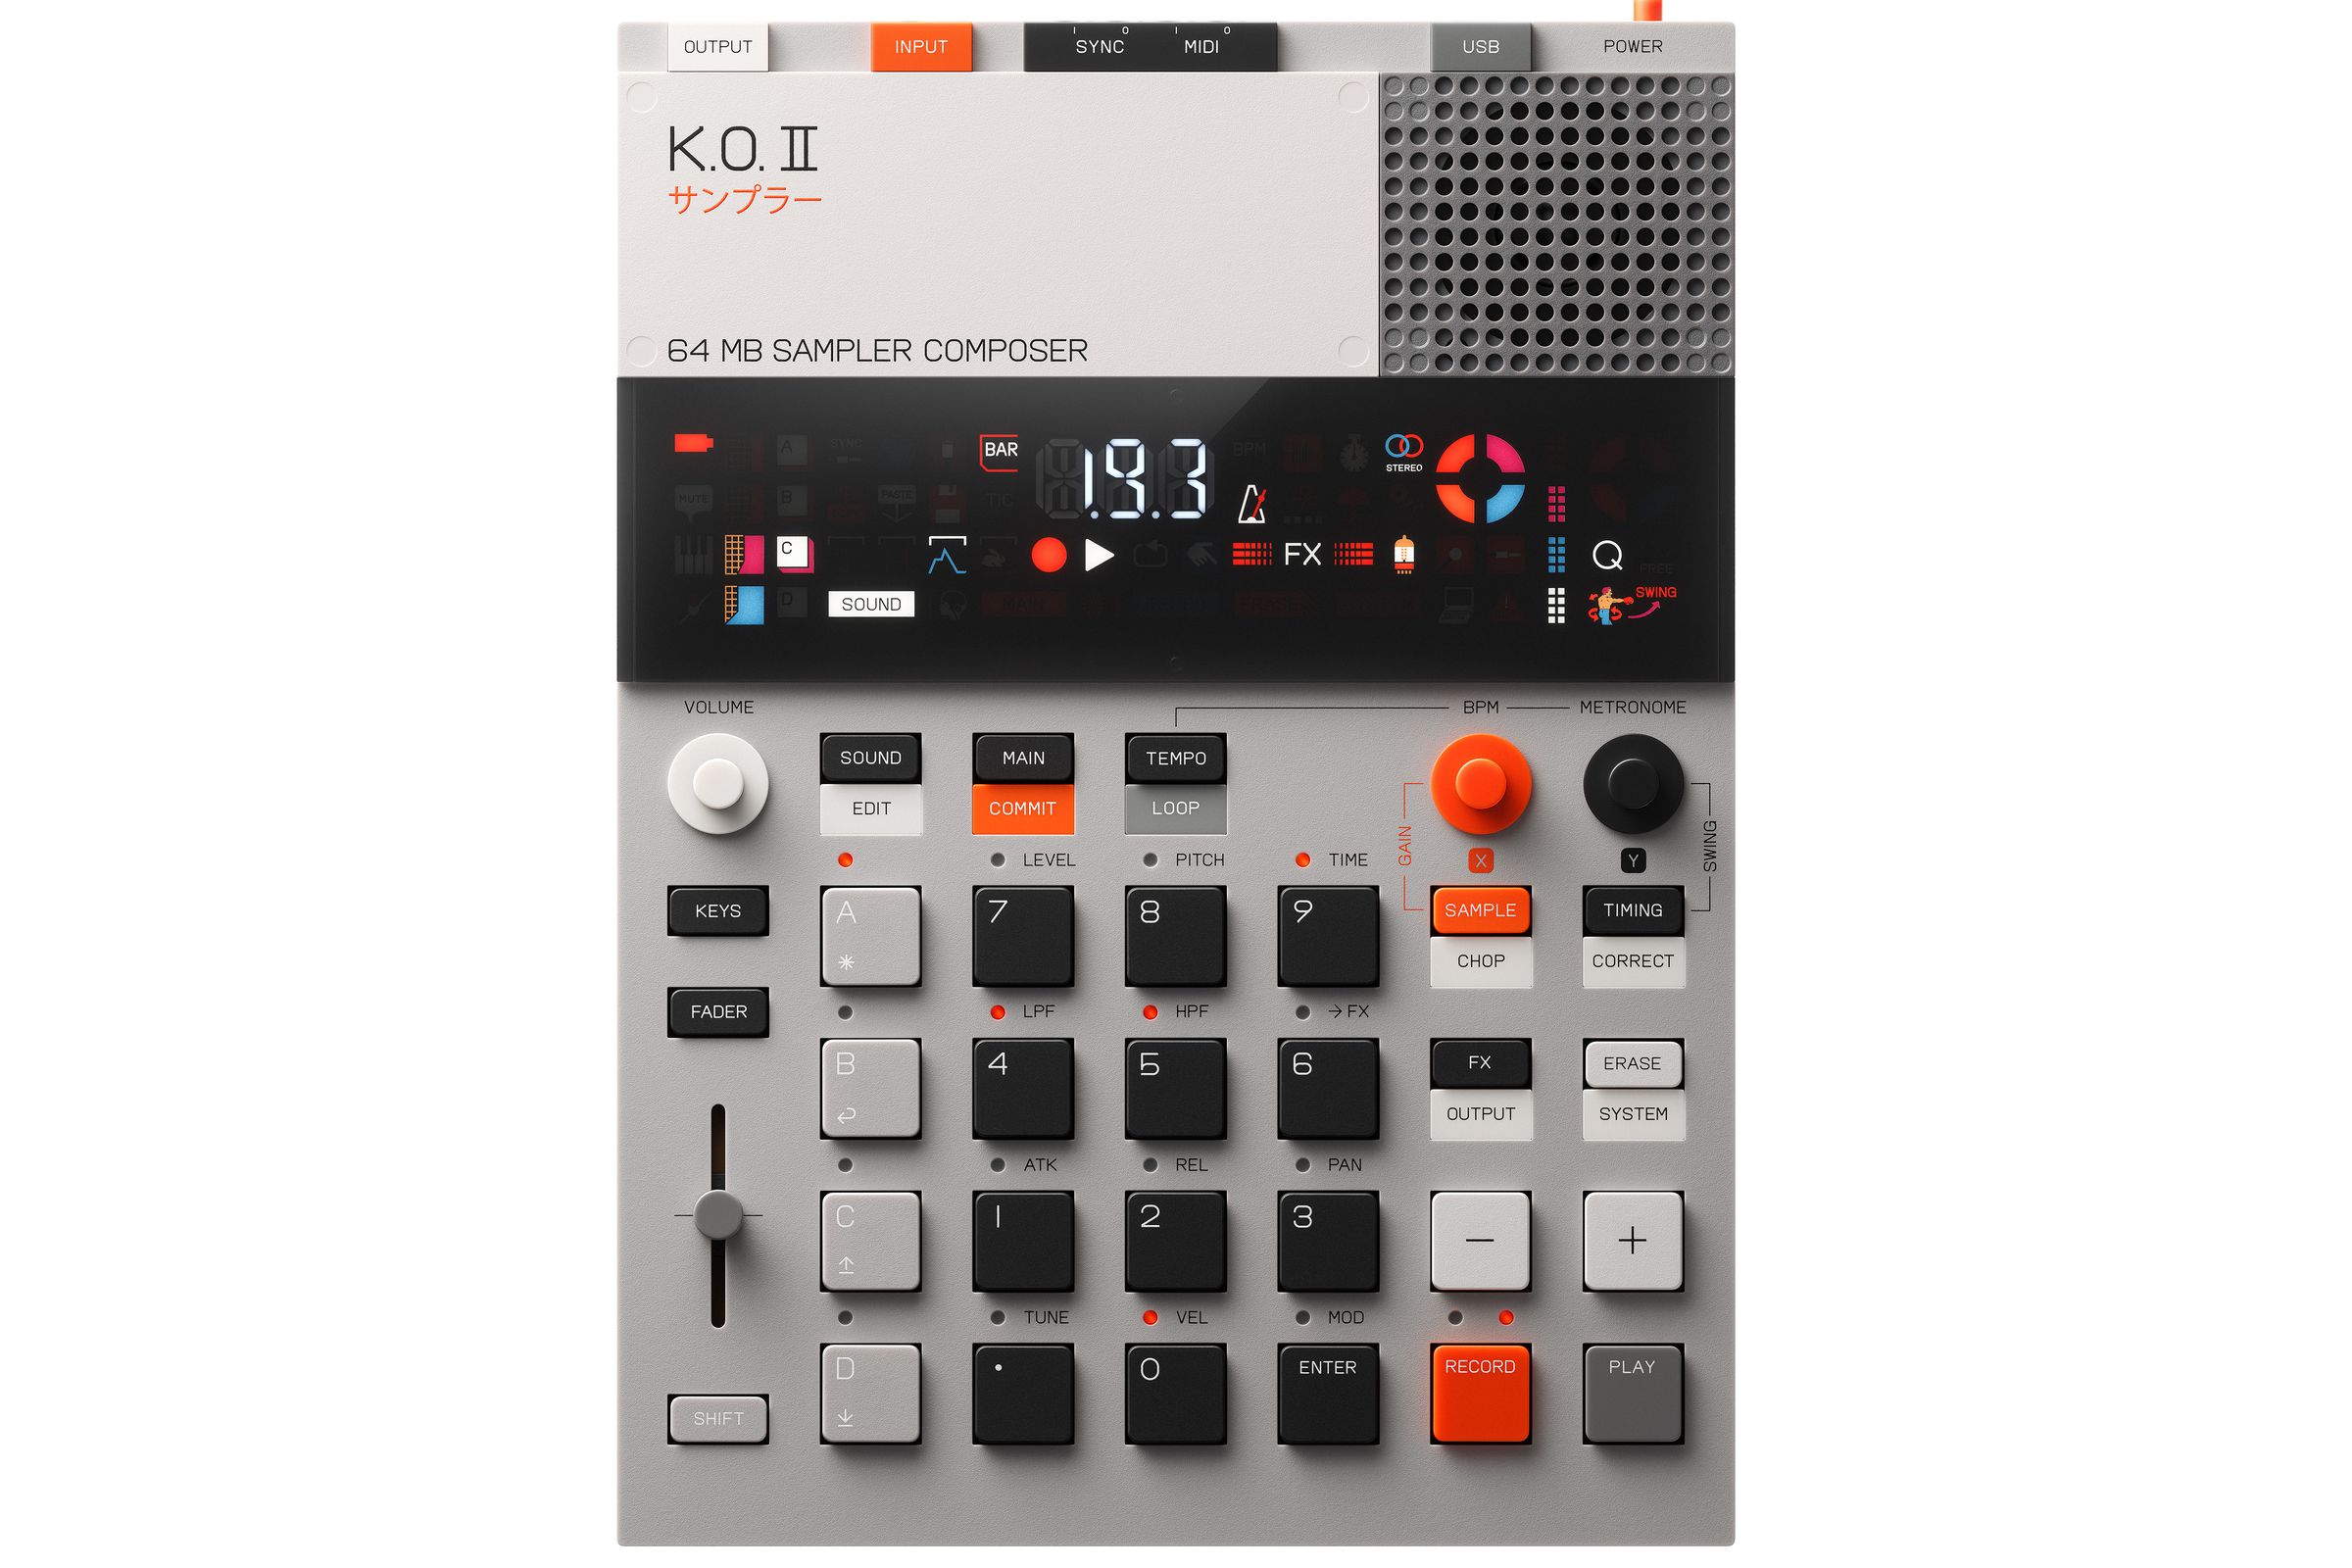 A picture of the EP-133 KO II, a gray and white and orange synthesizer.